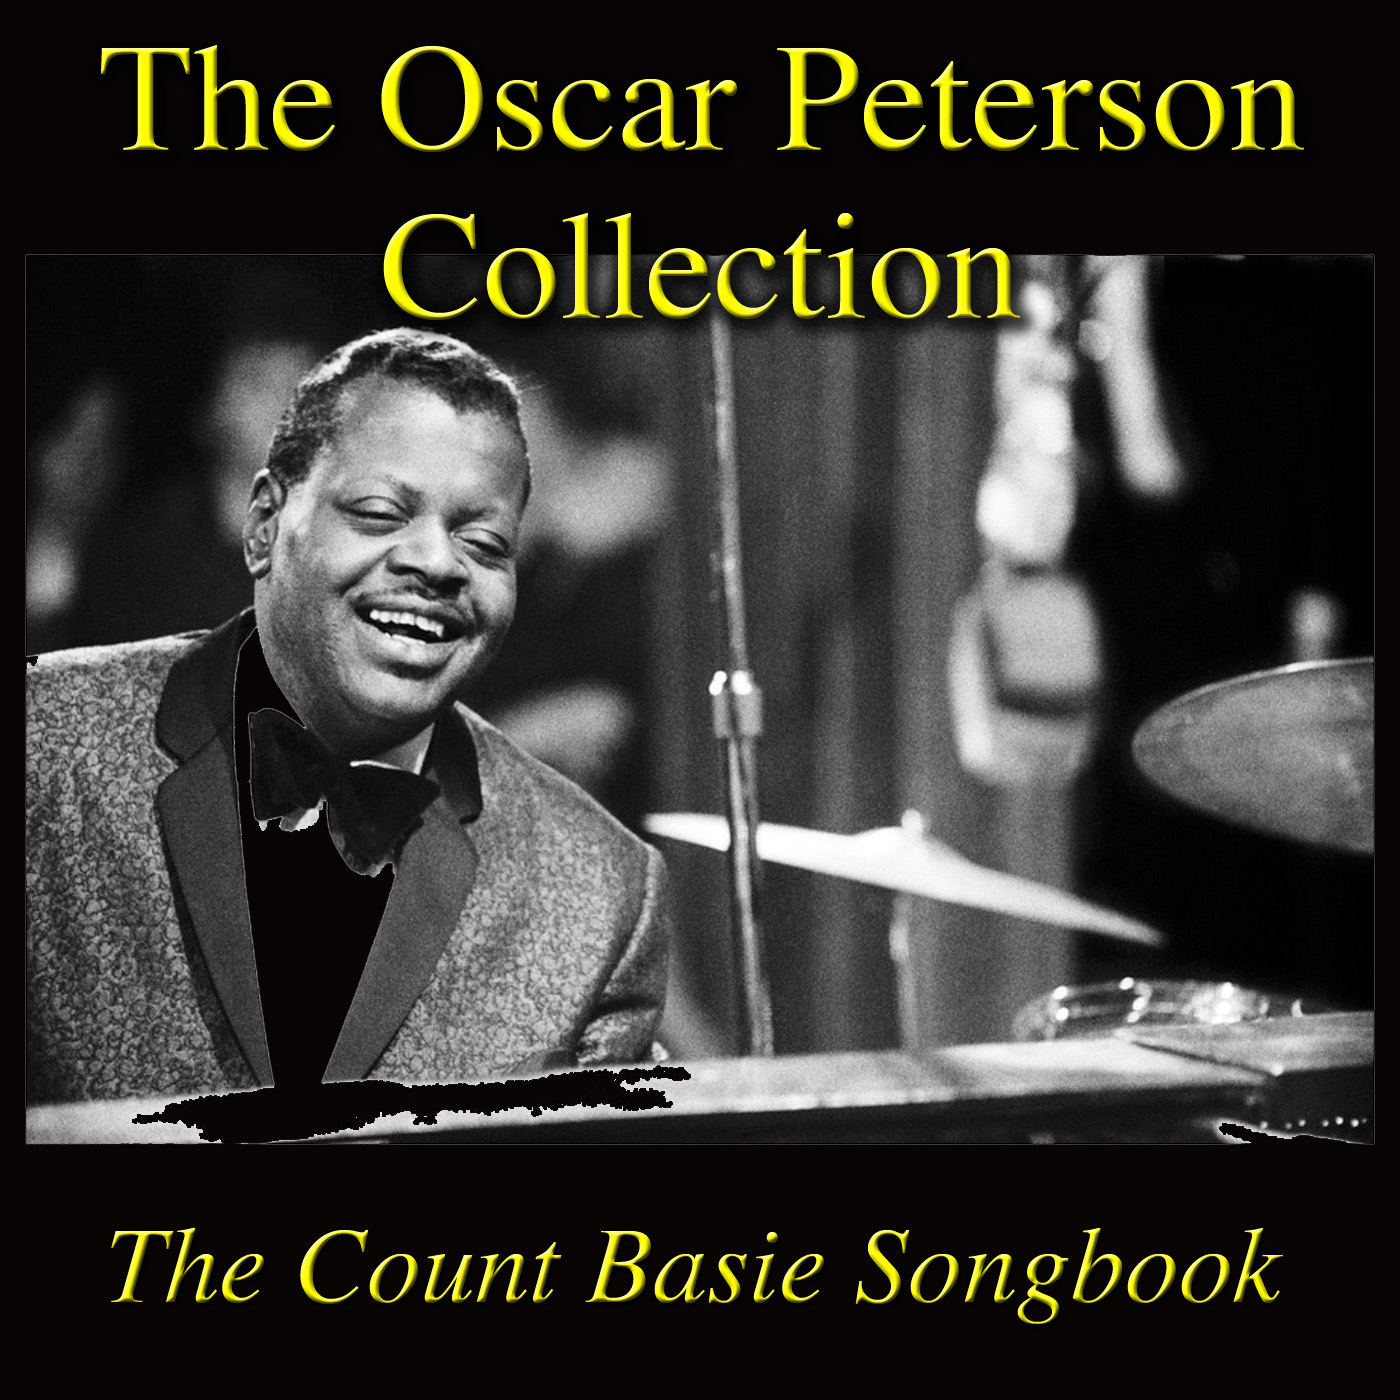 The Oscar Peterson Collection: The Count Basie Songbook